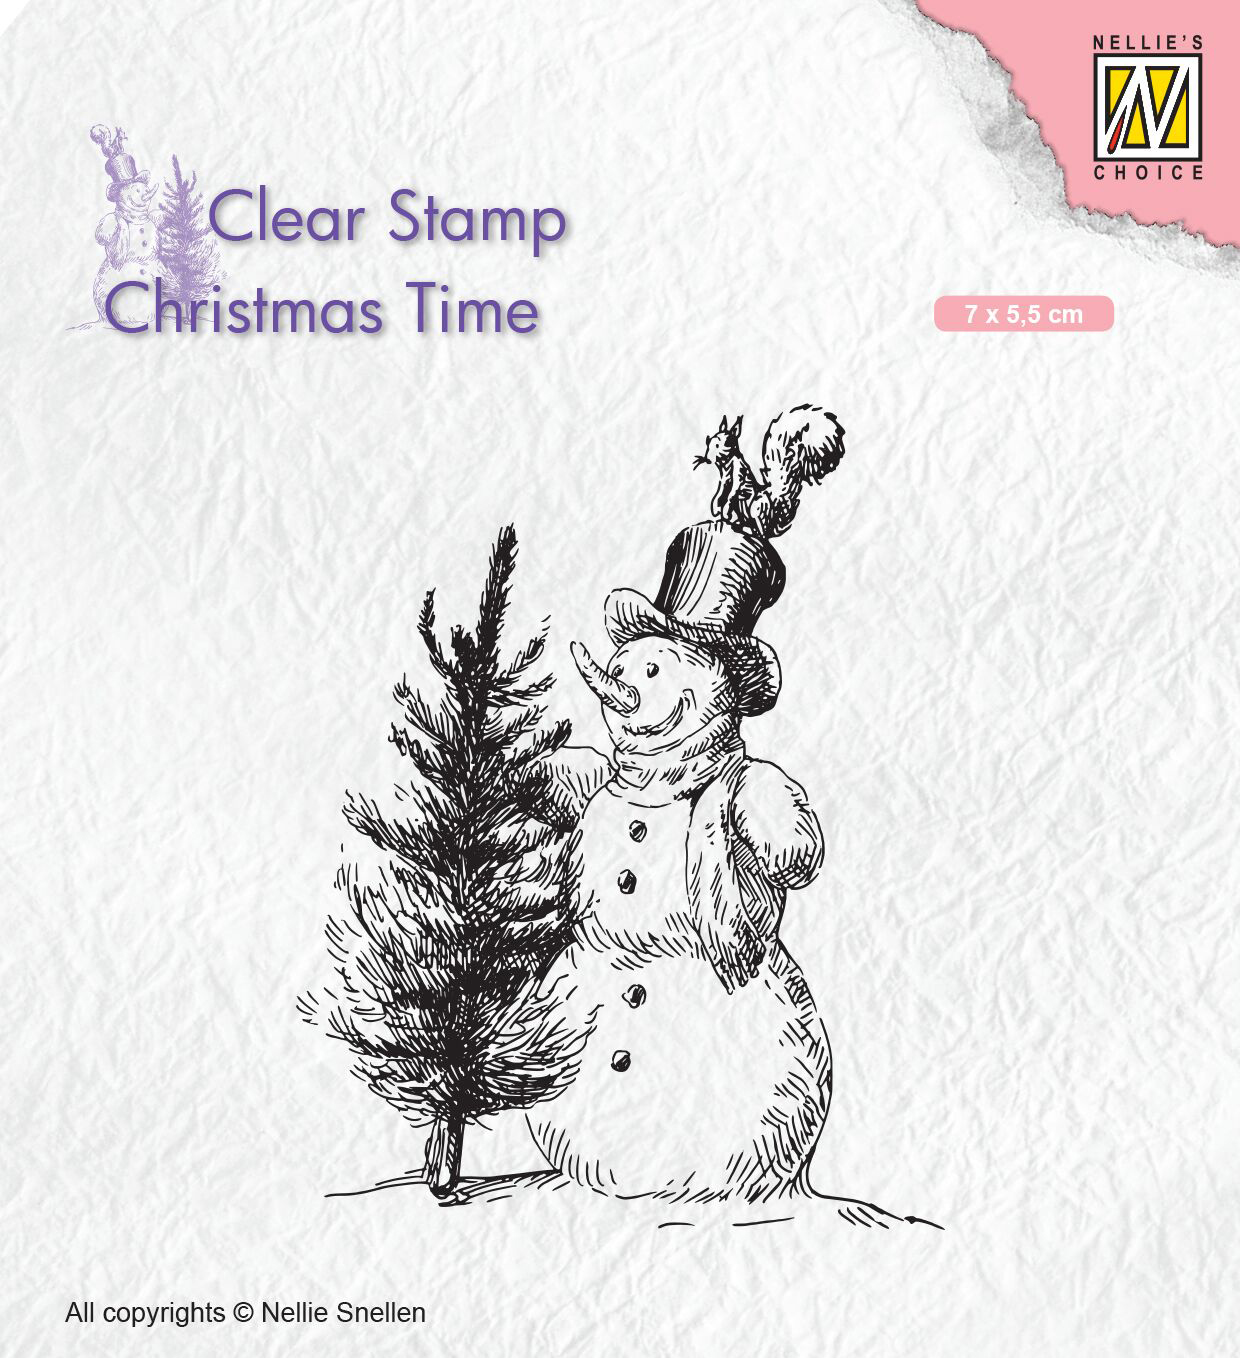 Nellie Snellen Clear Stamp Christmas Time - Snowman with Tree